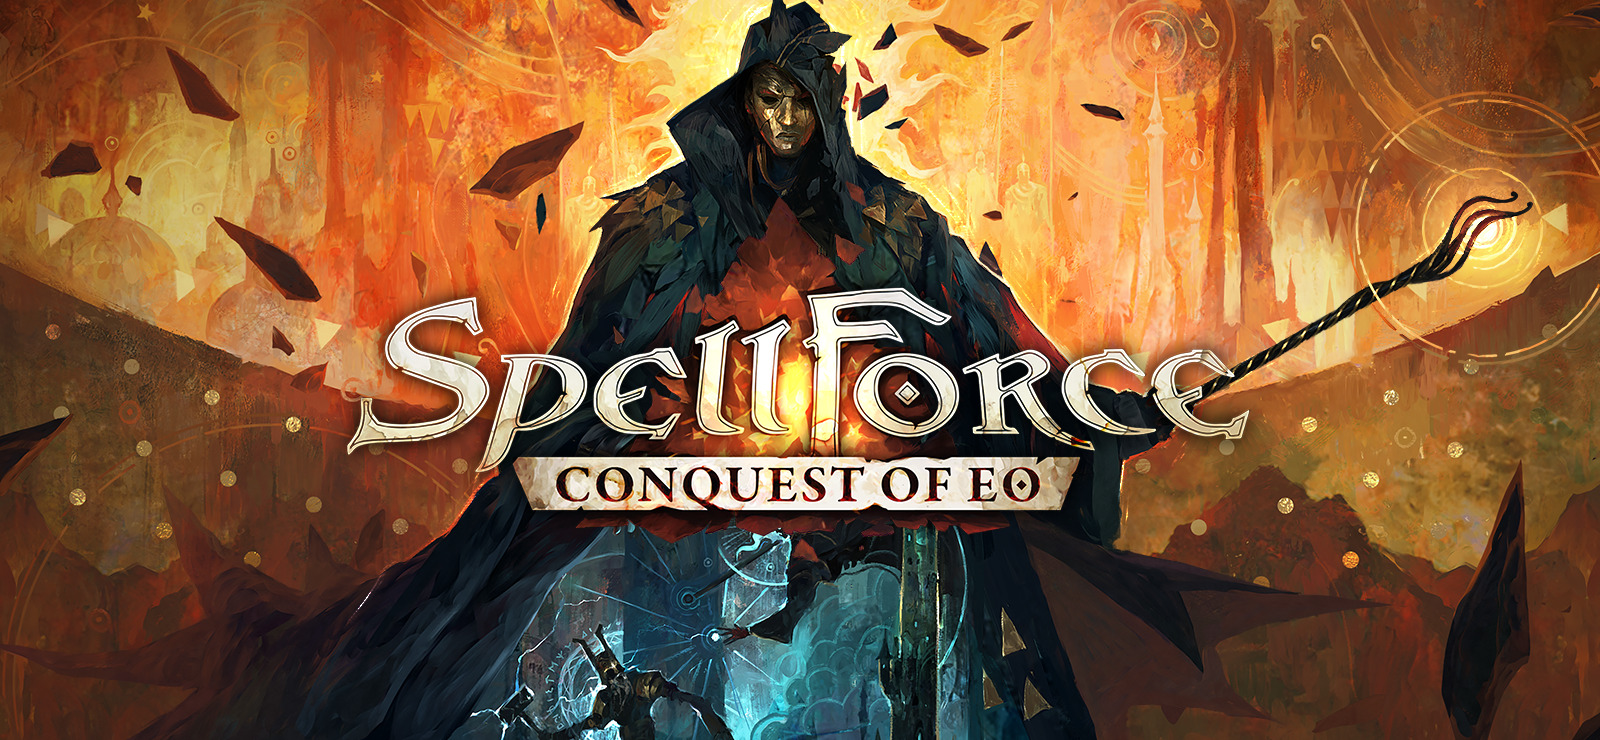 GEARVN - Giới thiệu game chiến thuật SpellForce: Conquest of Eo